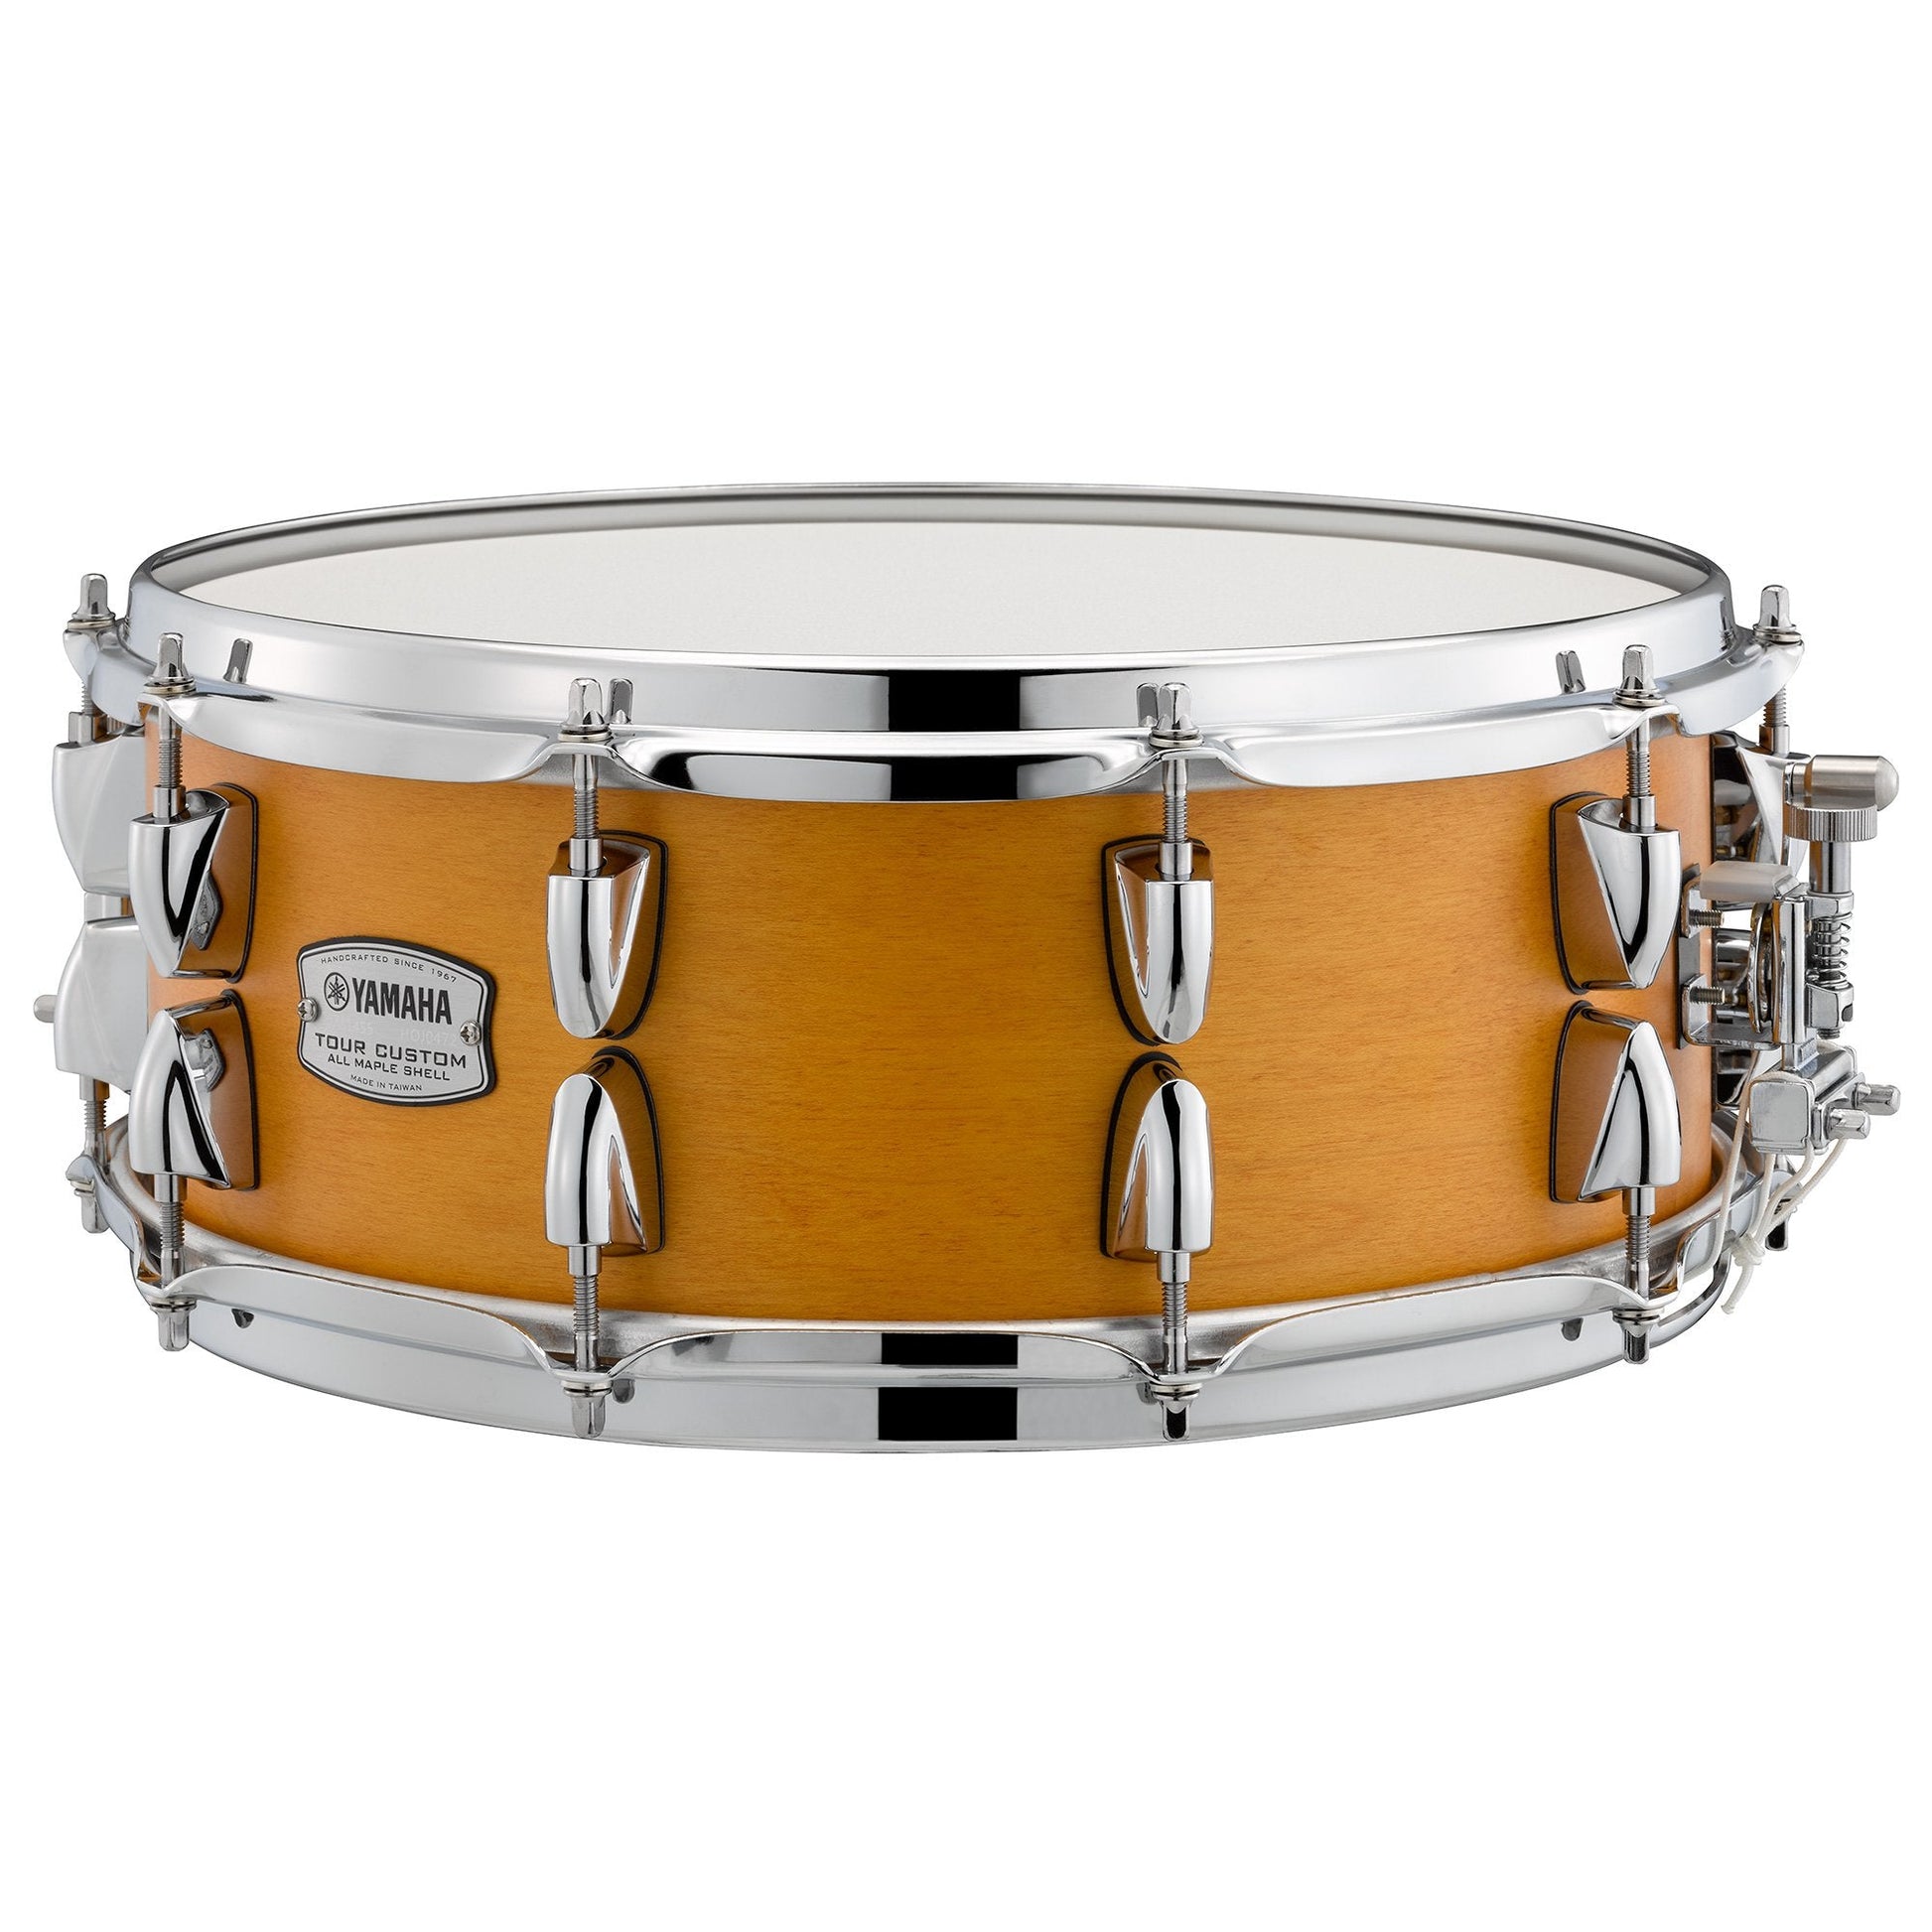 Trống Snare Yamaha TMS1455 - Việt Music